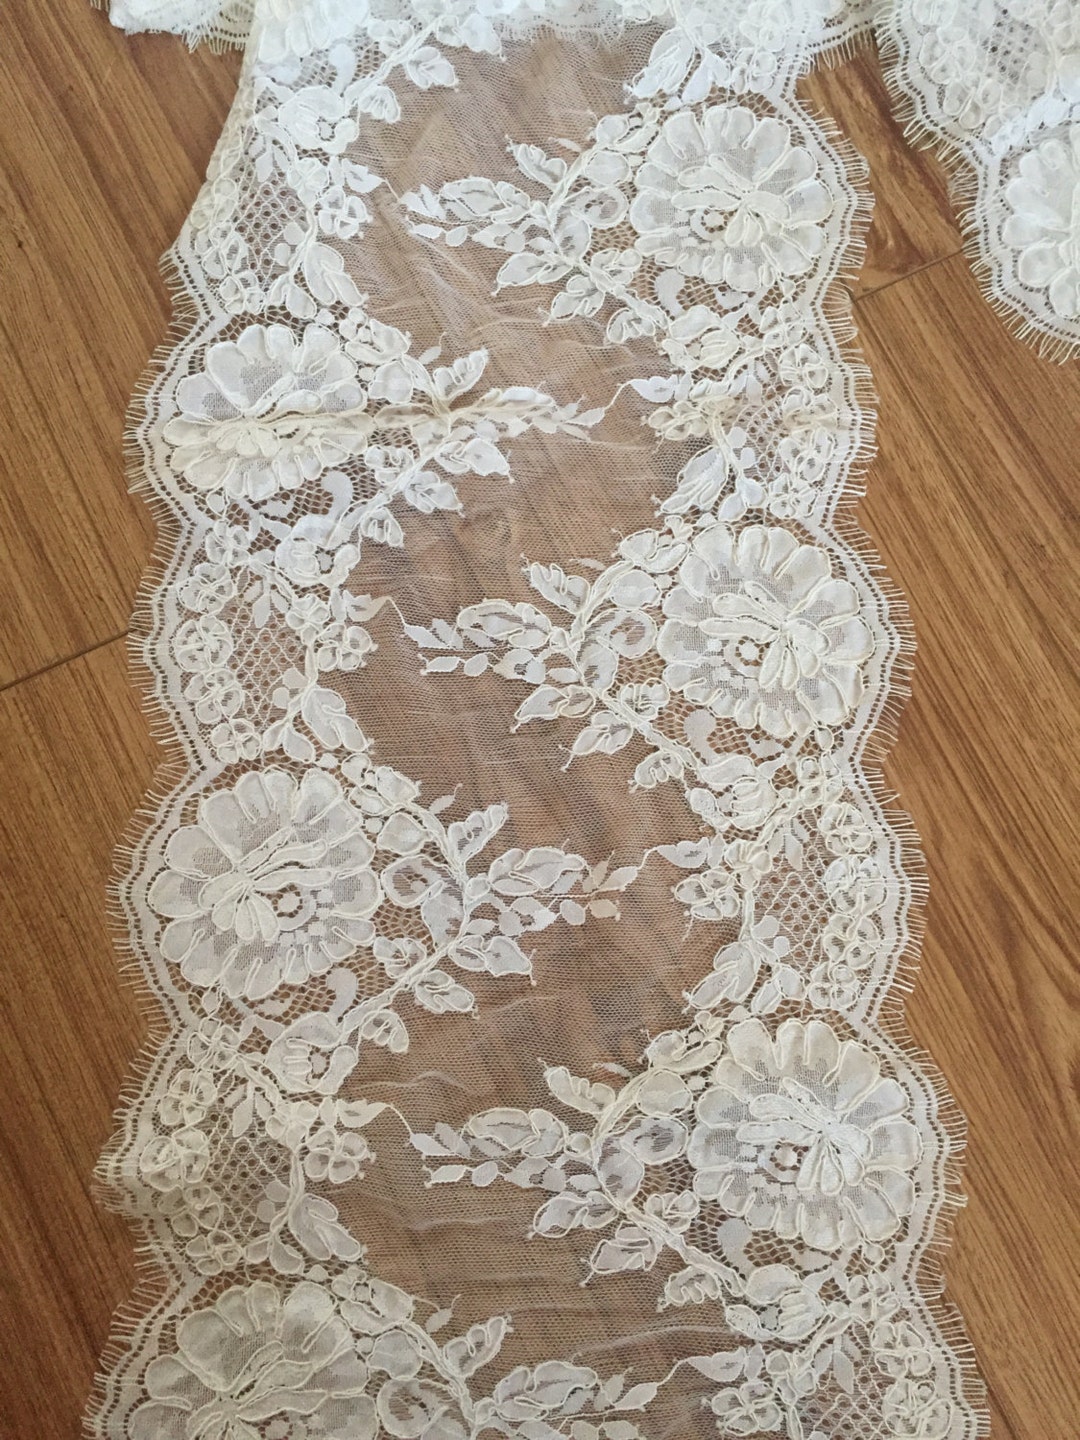 3 Yards French Alencon Lace Fabric Trim in Pale Ivory Color - Etsy